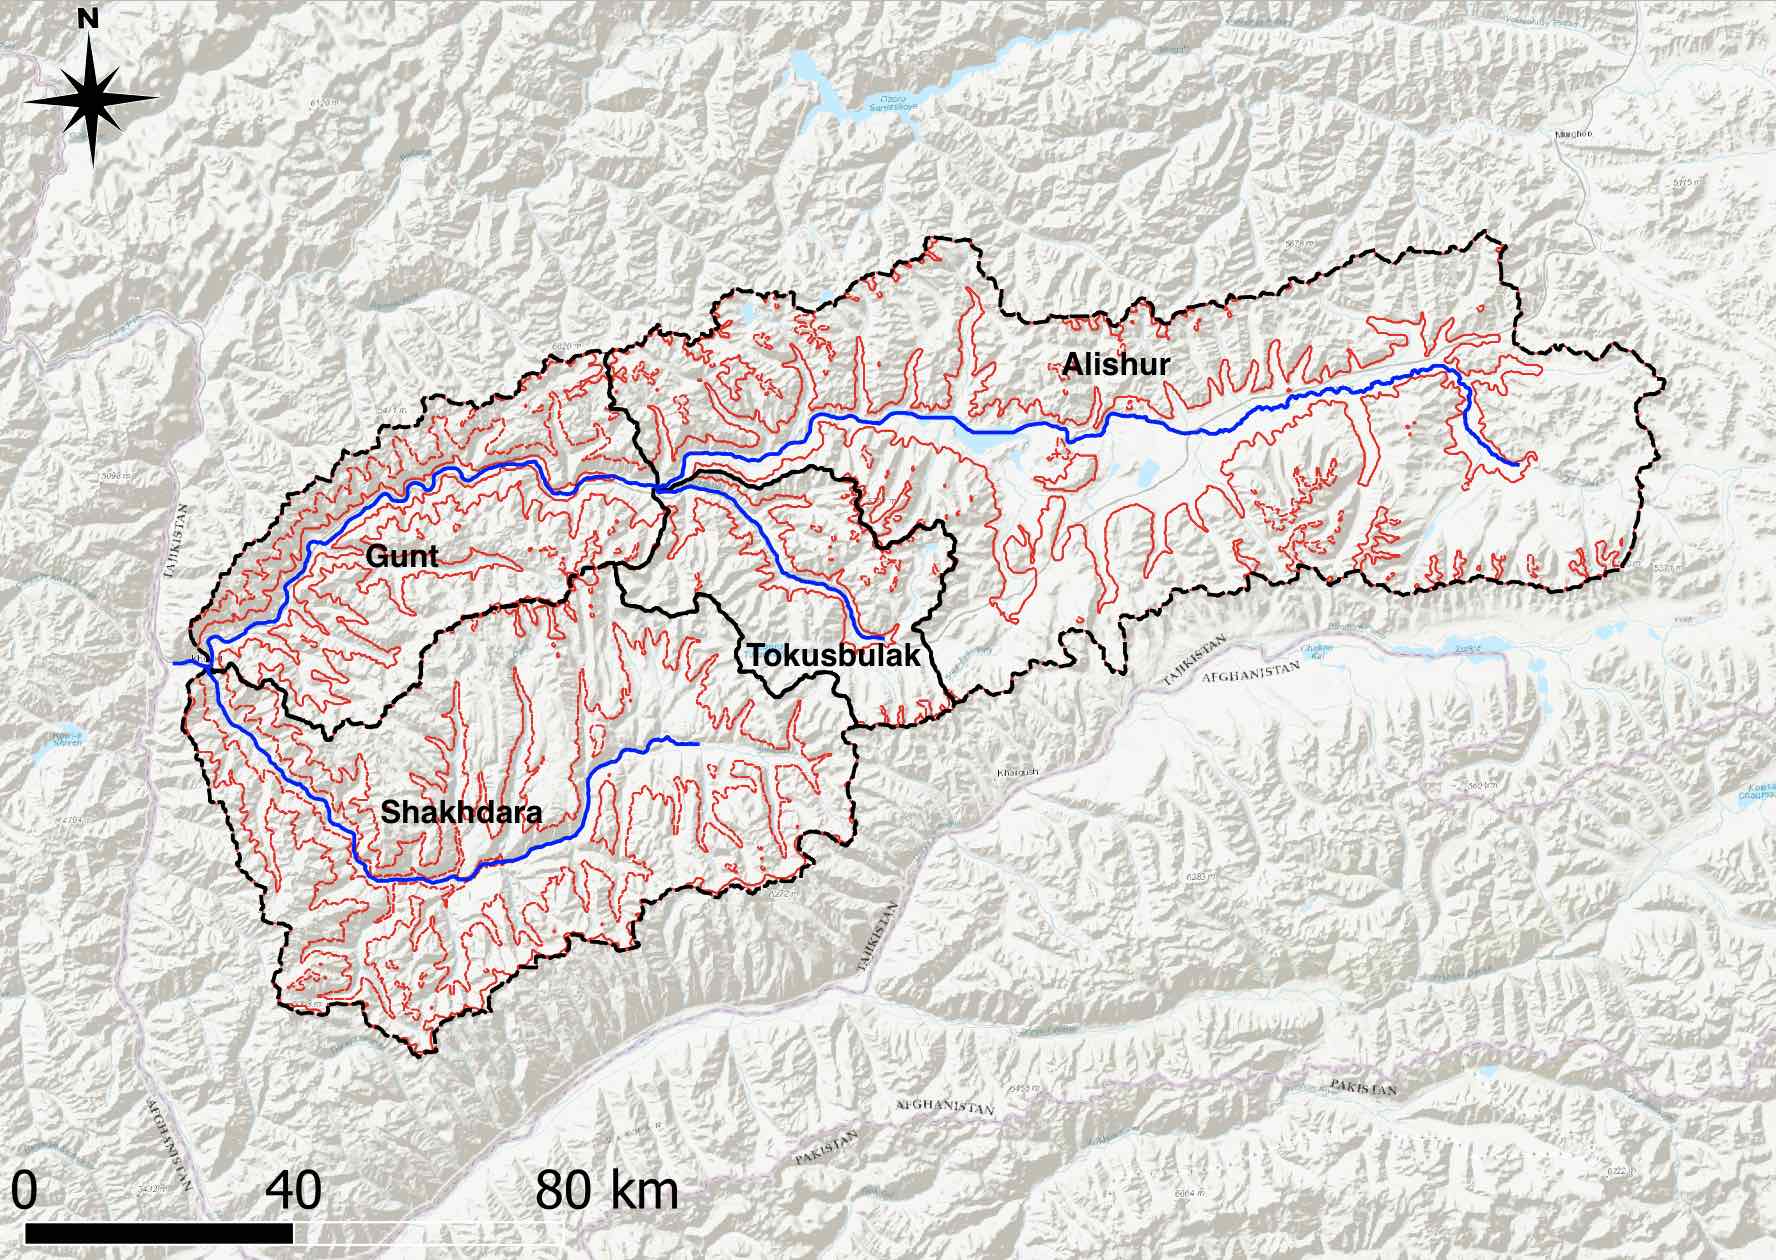 The Gunt river catchment elevation bands are shown in red color. The entire catchment was divided into 4 altitude zones with an interval spacing of 1'000 meters. In real world climate impact studies, elevation bands are normally generated with an interval spacing of 200 - 500 meters.